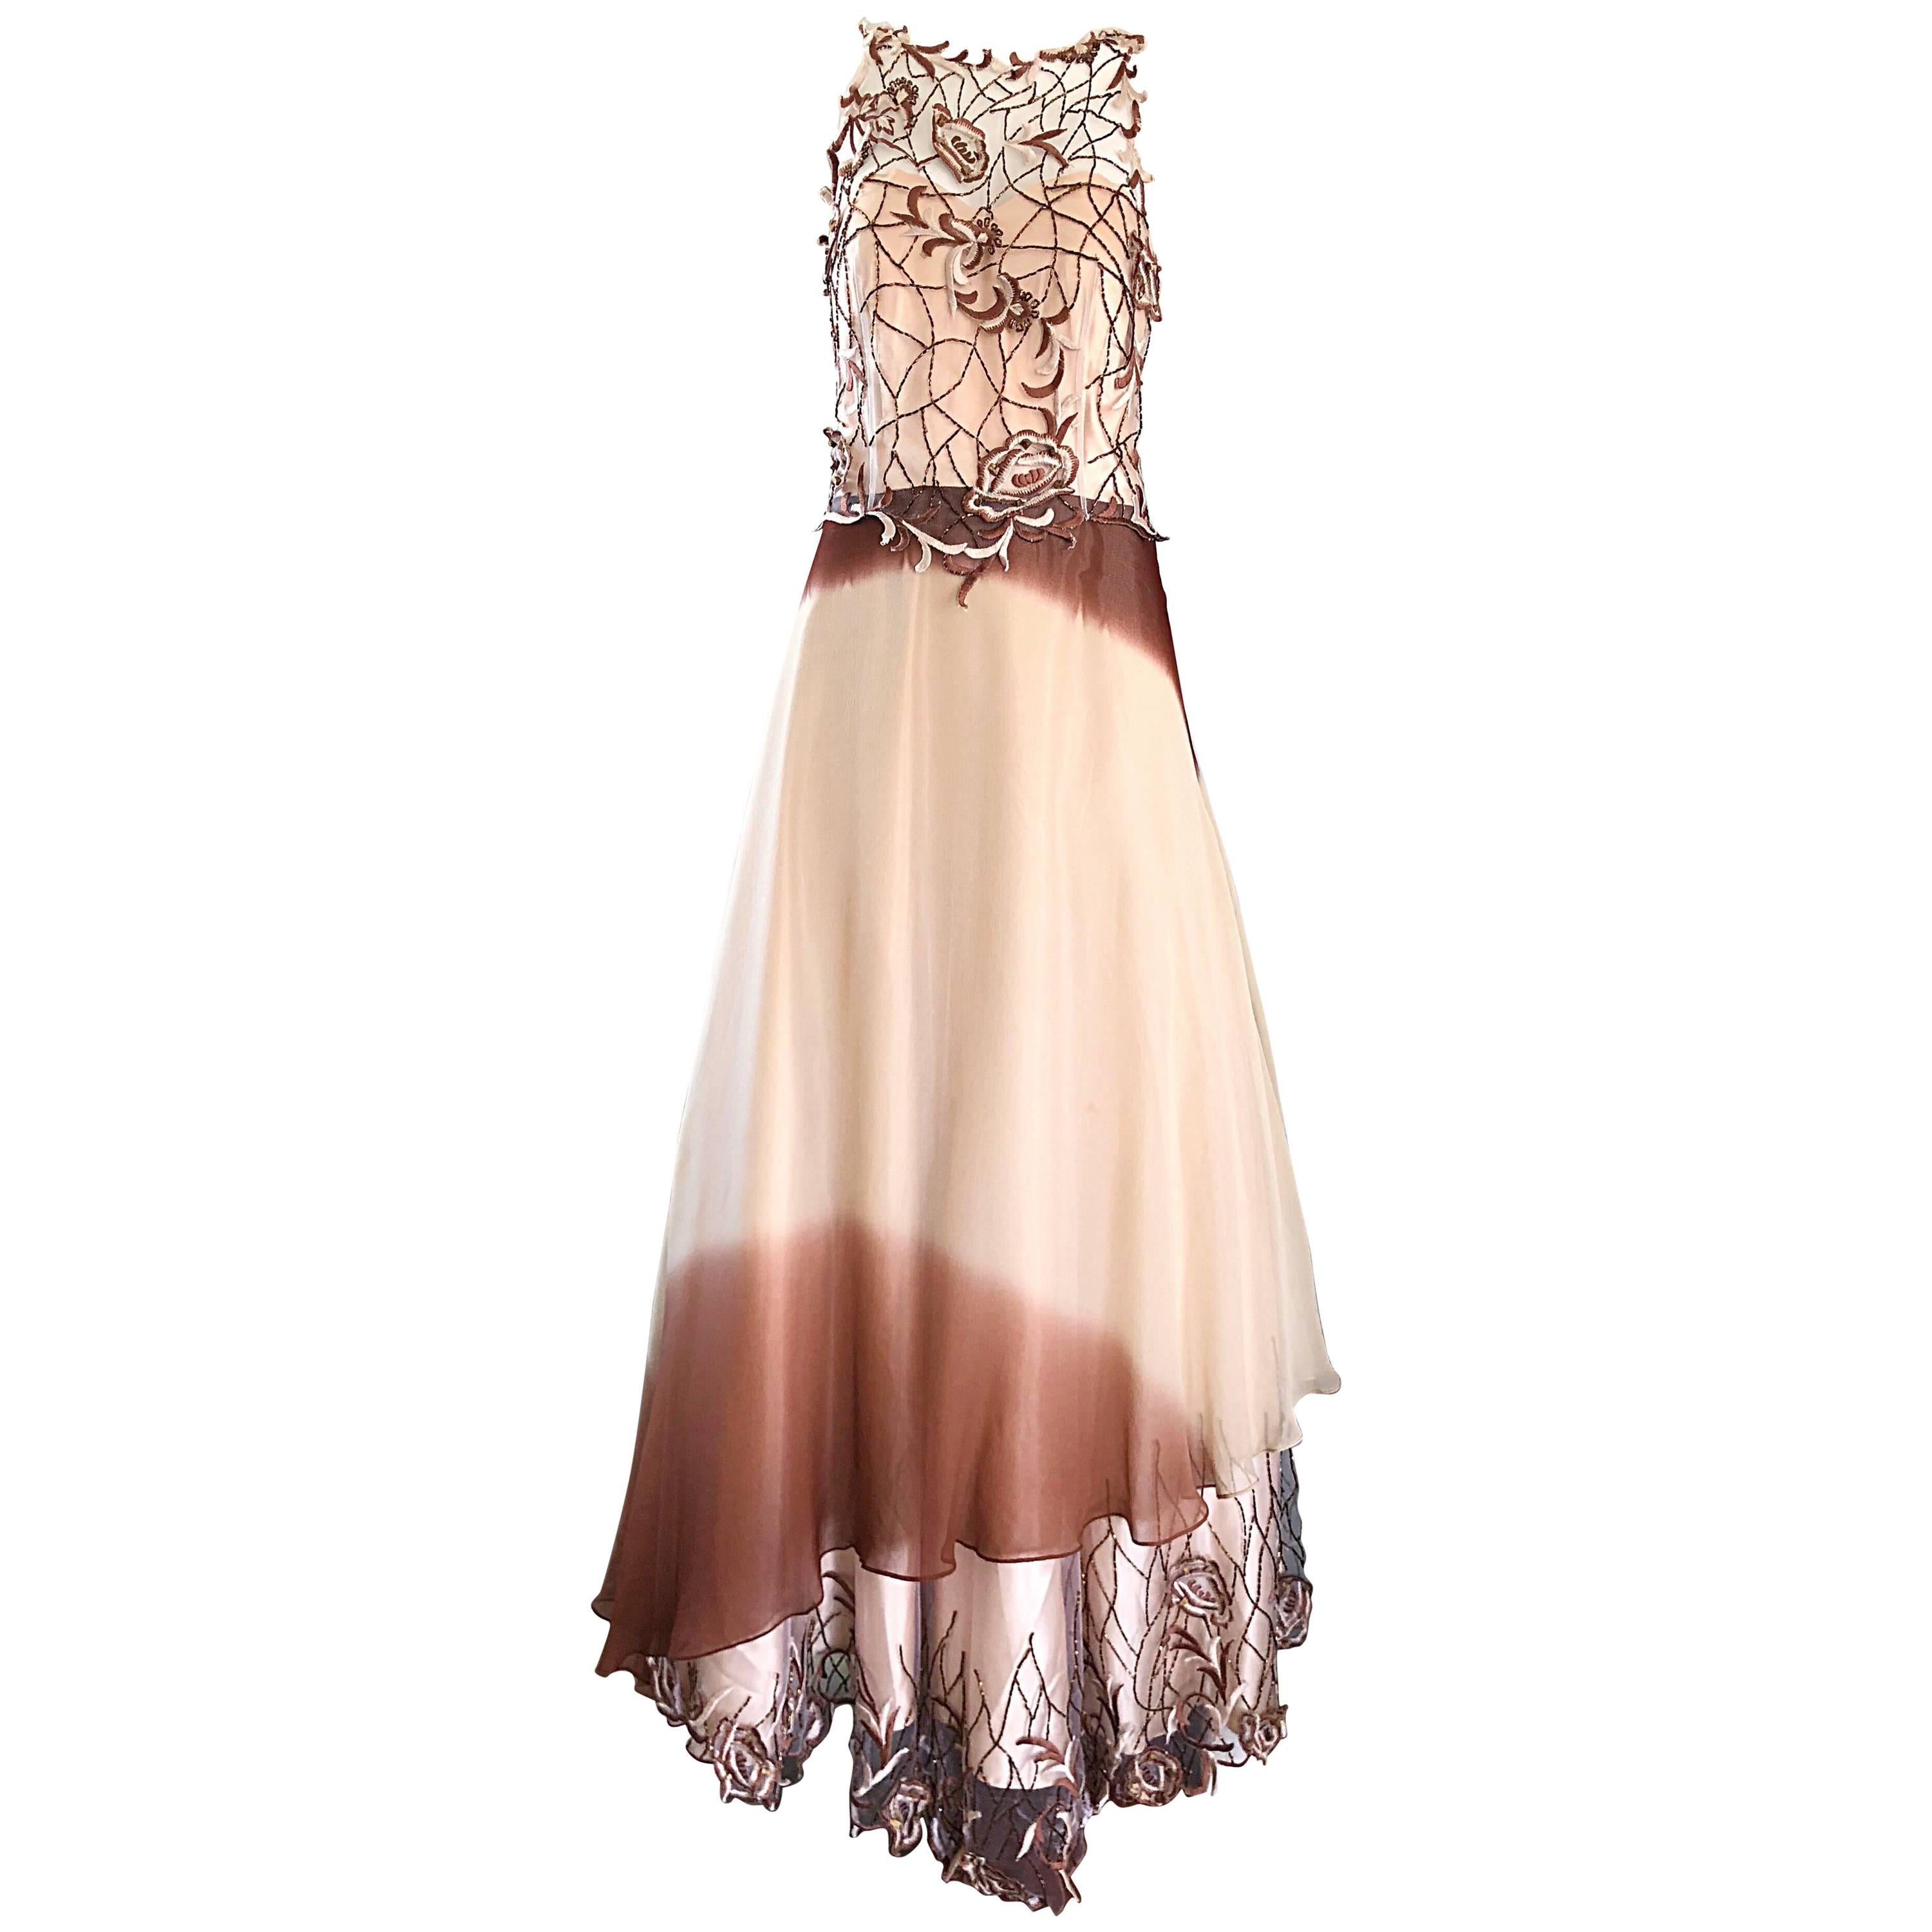 Max Nugus Haute Couture 1990s Size 8 Pink + Brown Ombre Chiffon Vintage 90s Gown